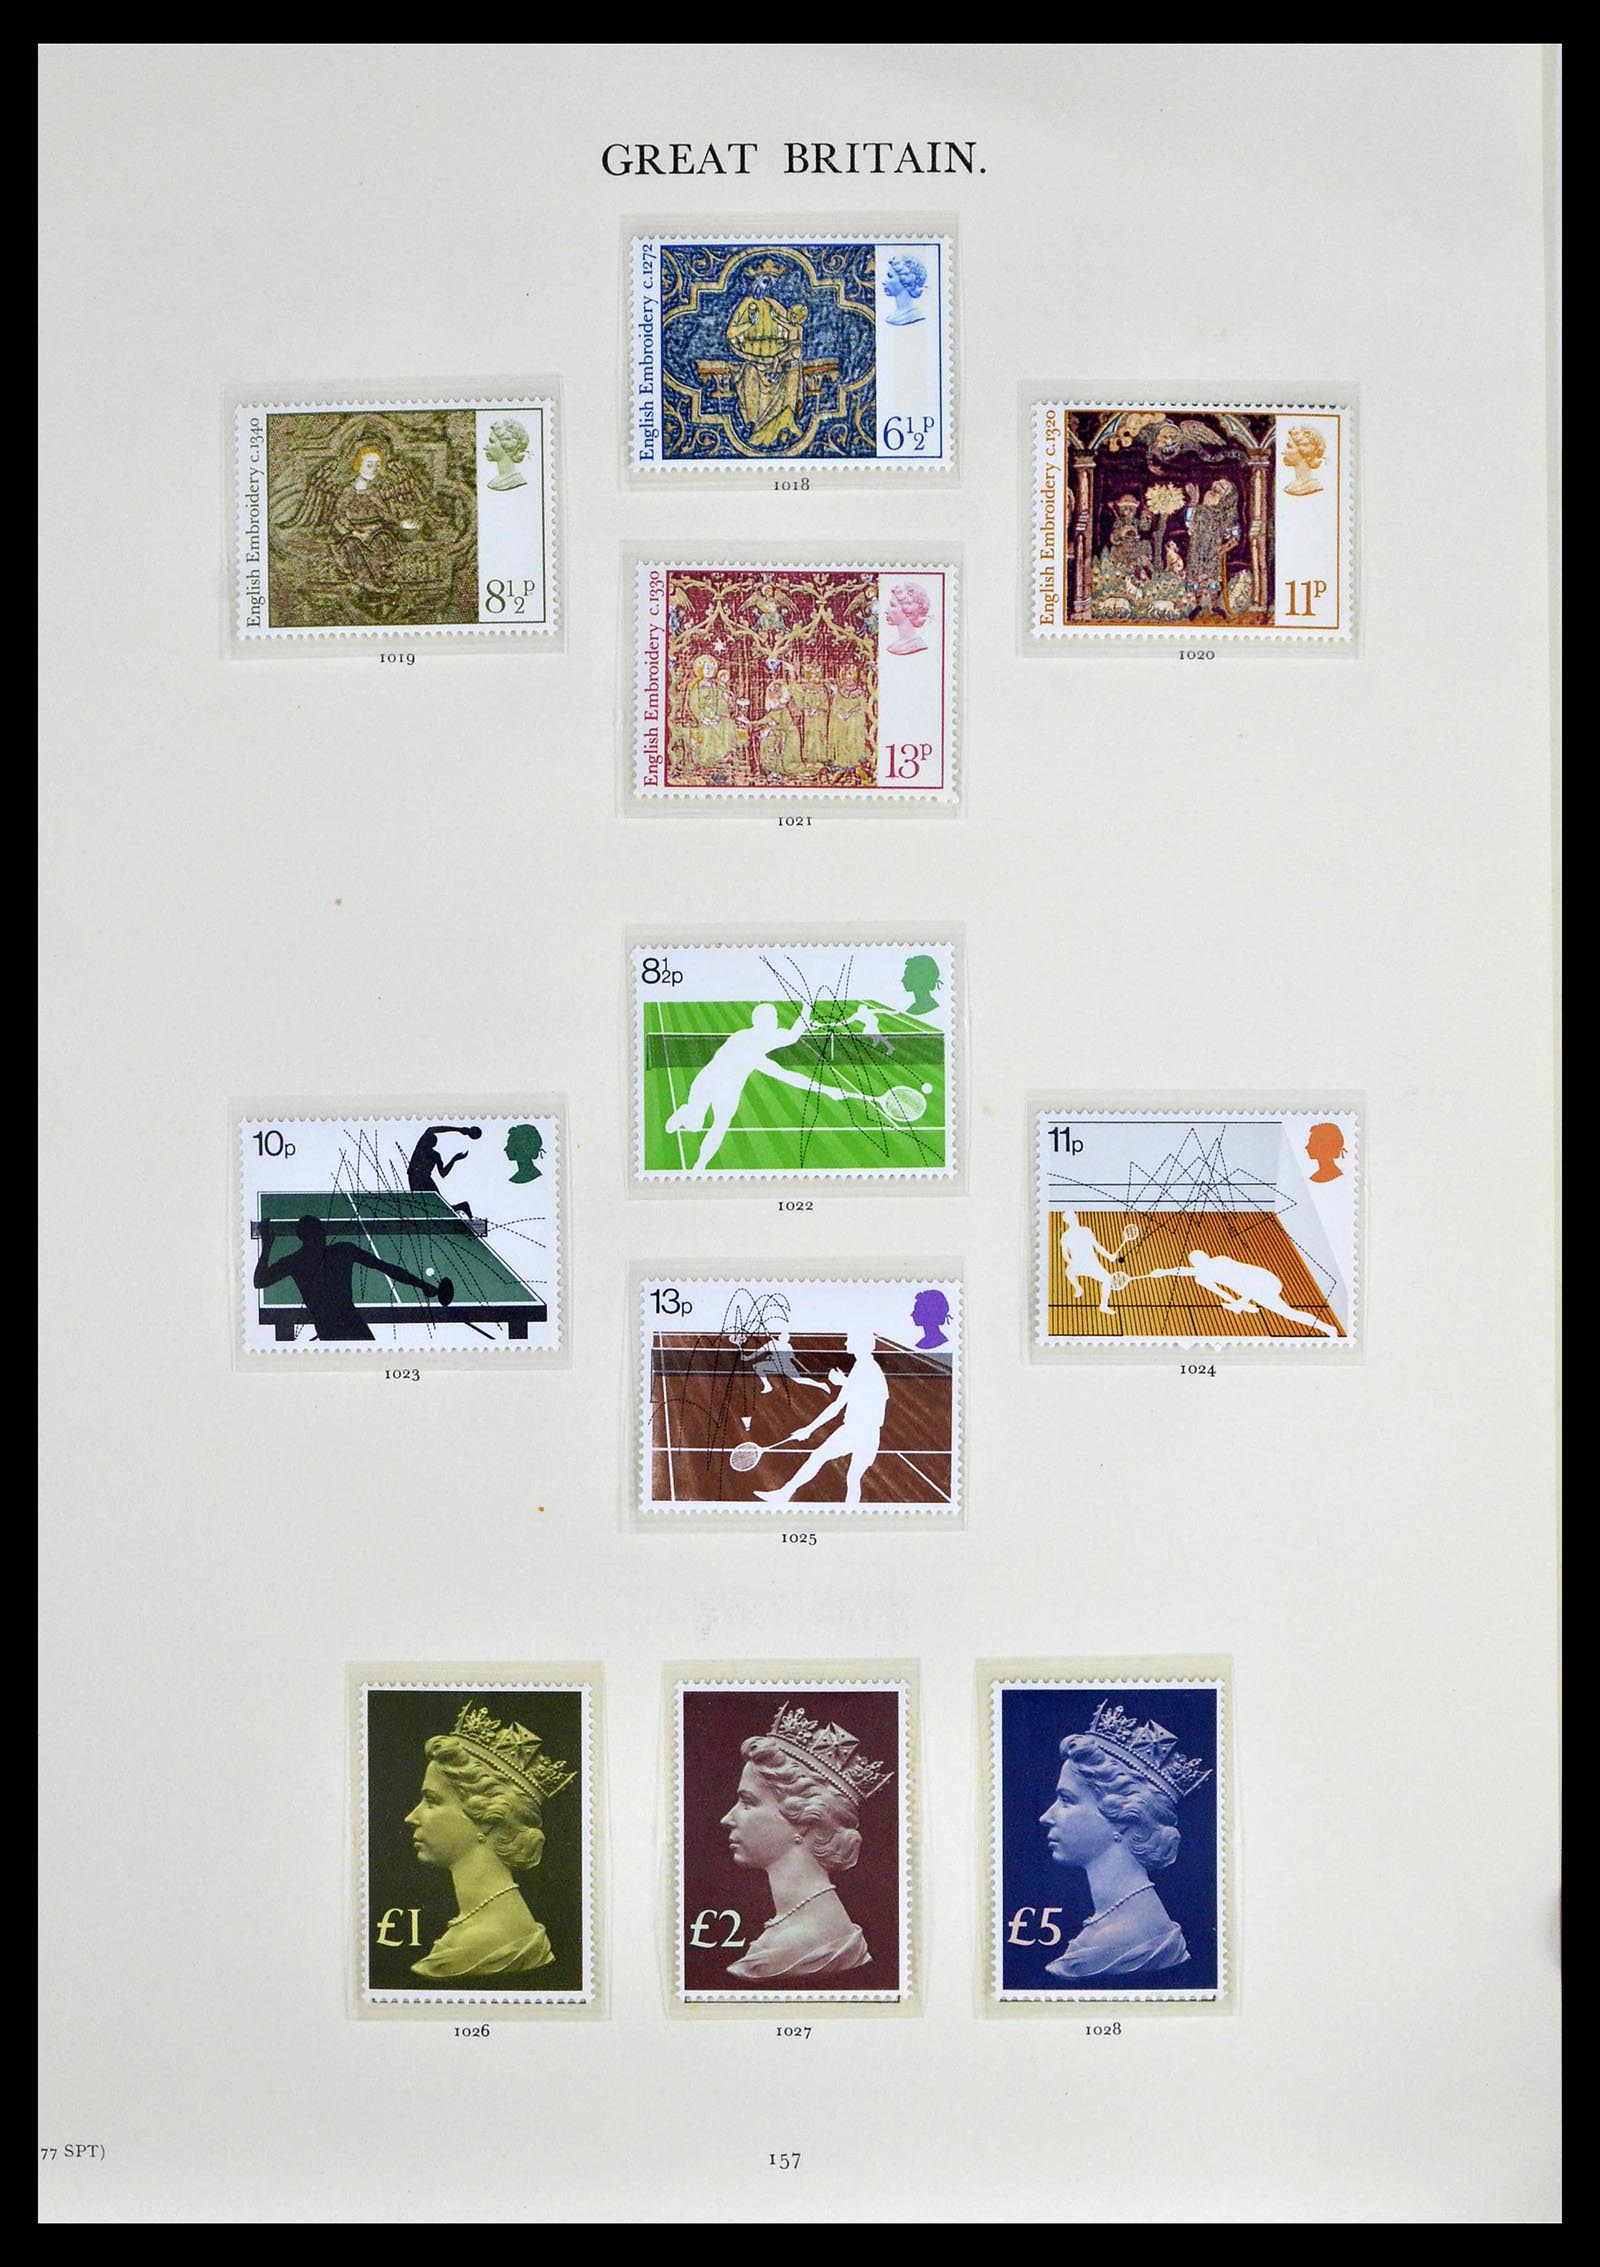 39025 0074 - Stamp collection 39025 Great Britain specialised 1840-1990.